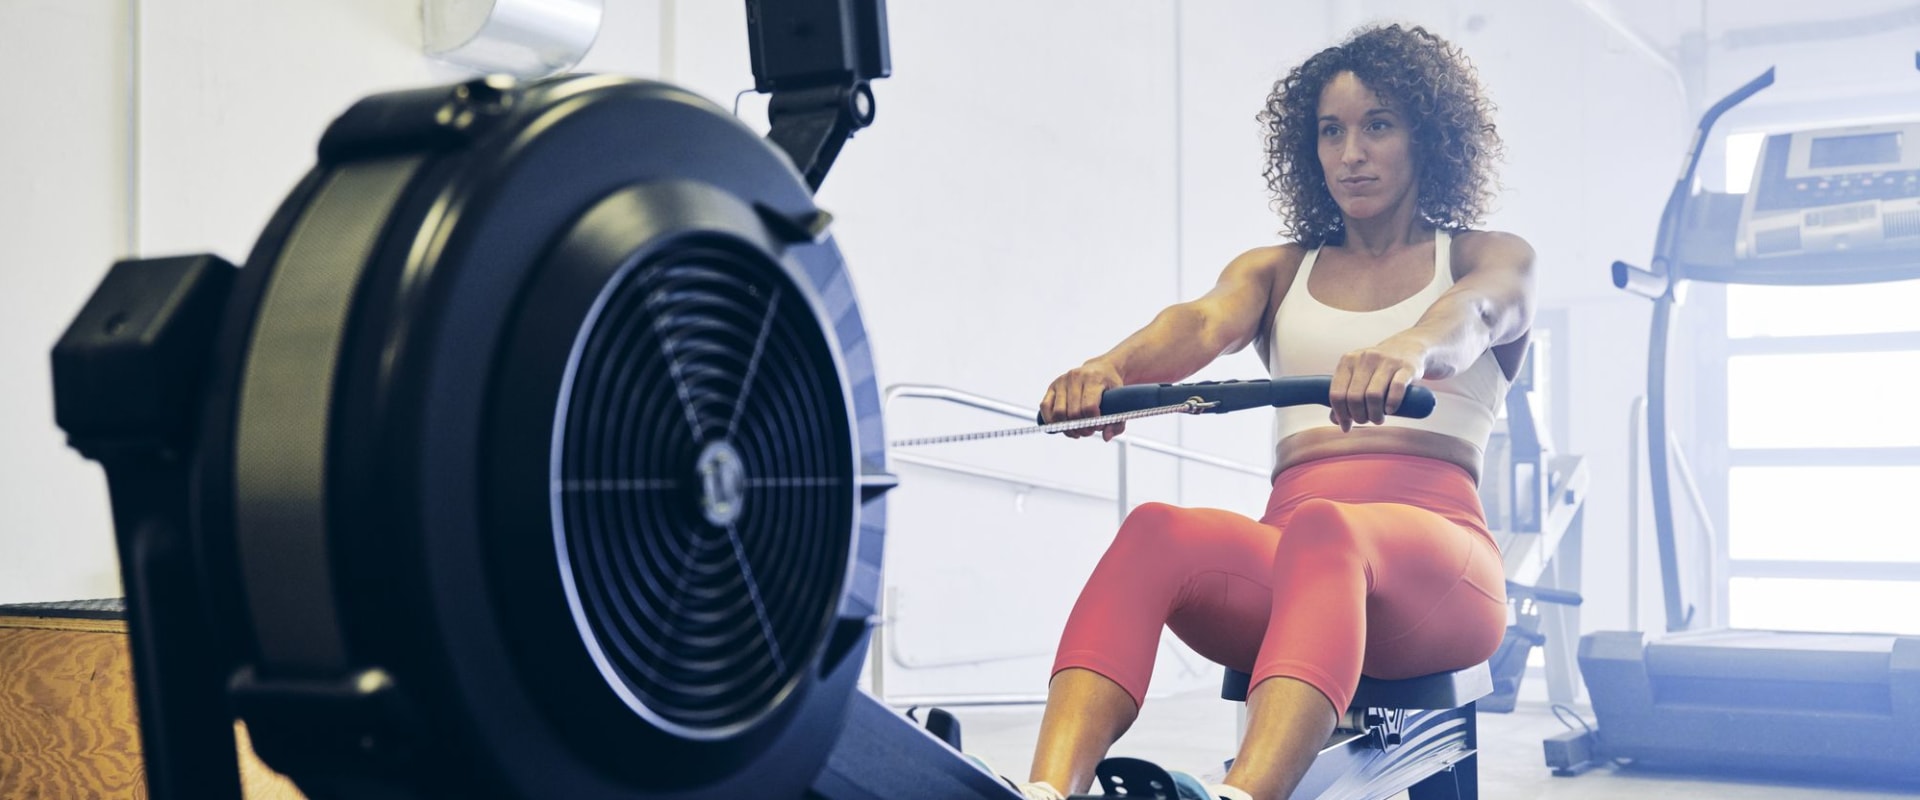 Rowing Machine: Benefits, Types, and Exercises